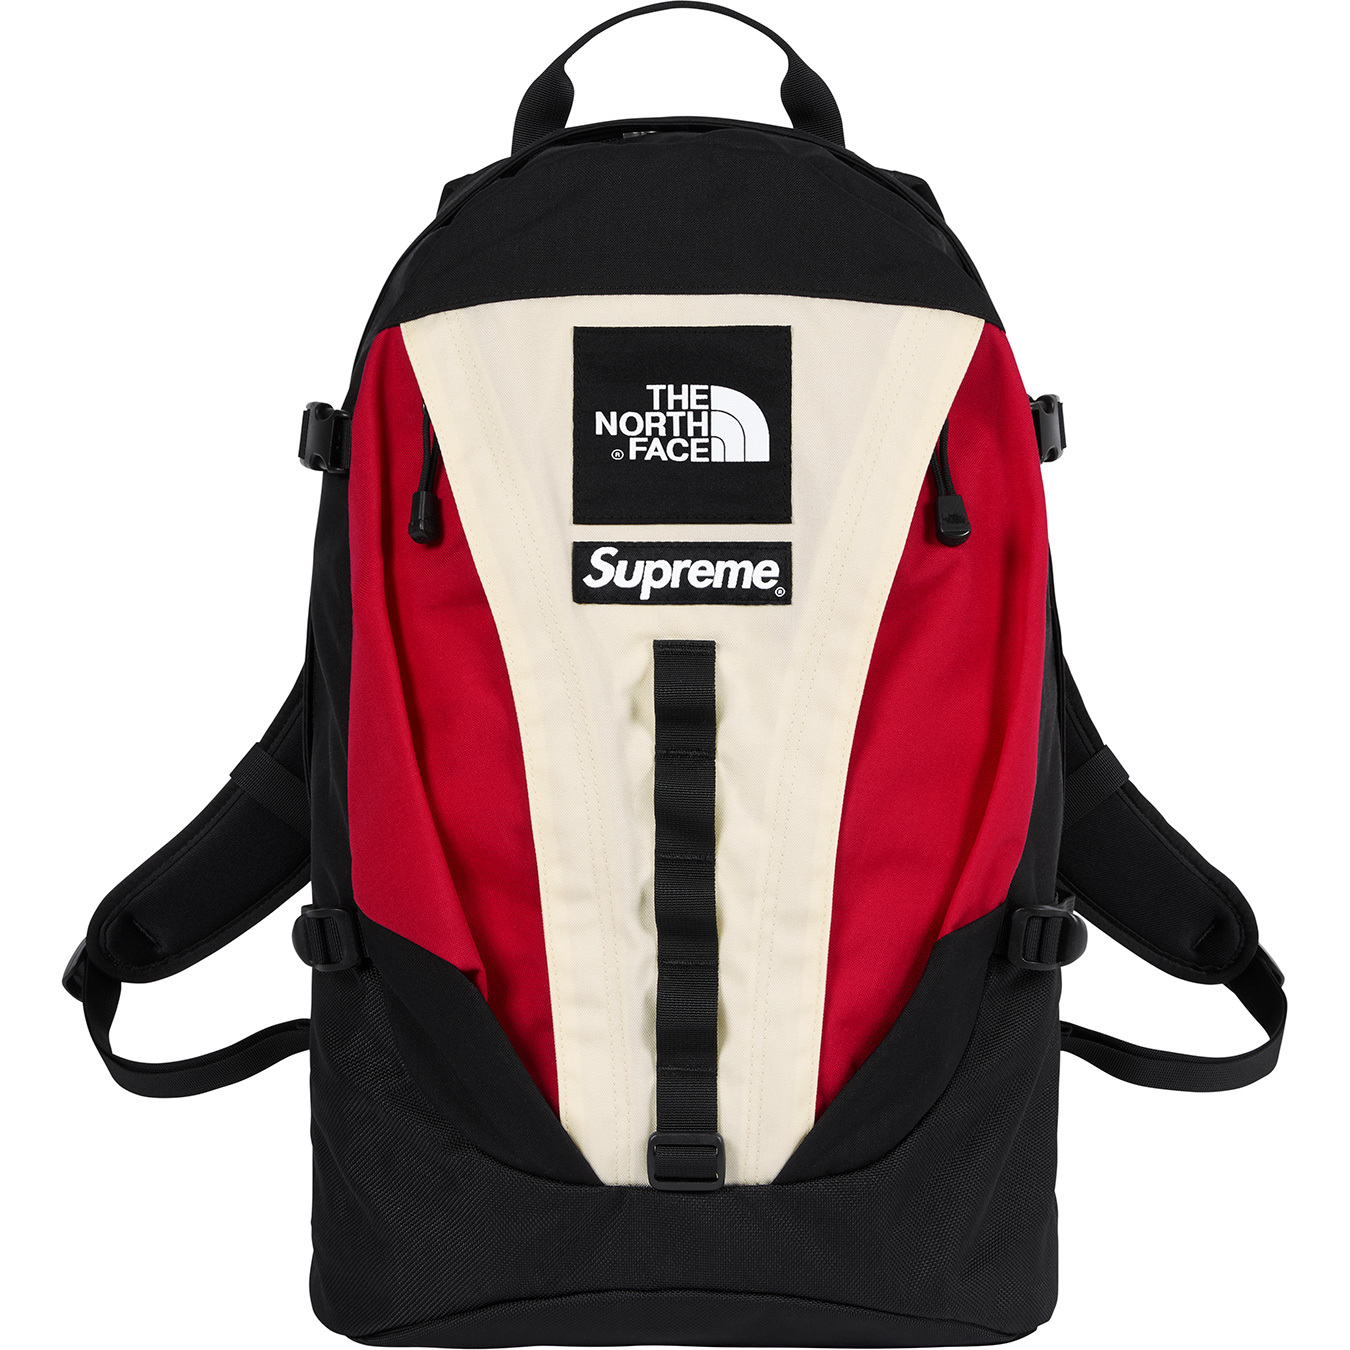 Supreme The North Face バックパック 18aw 2018